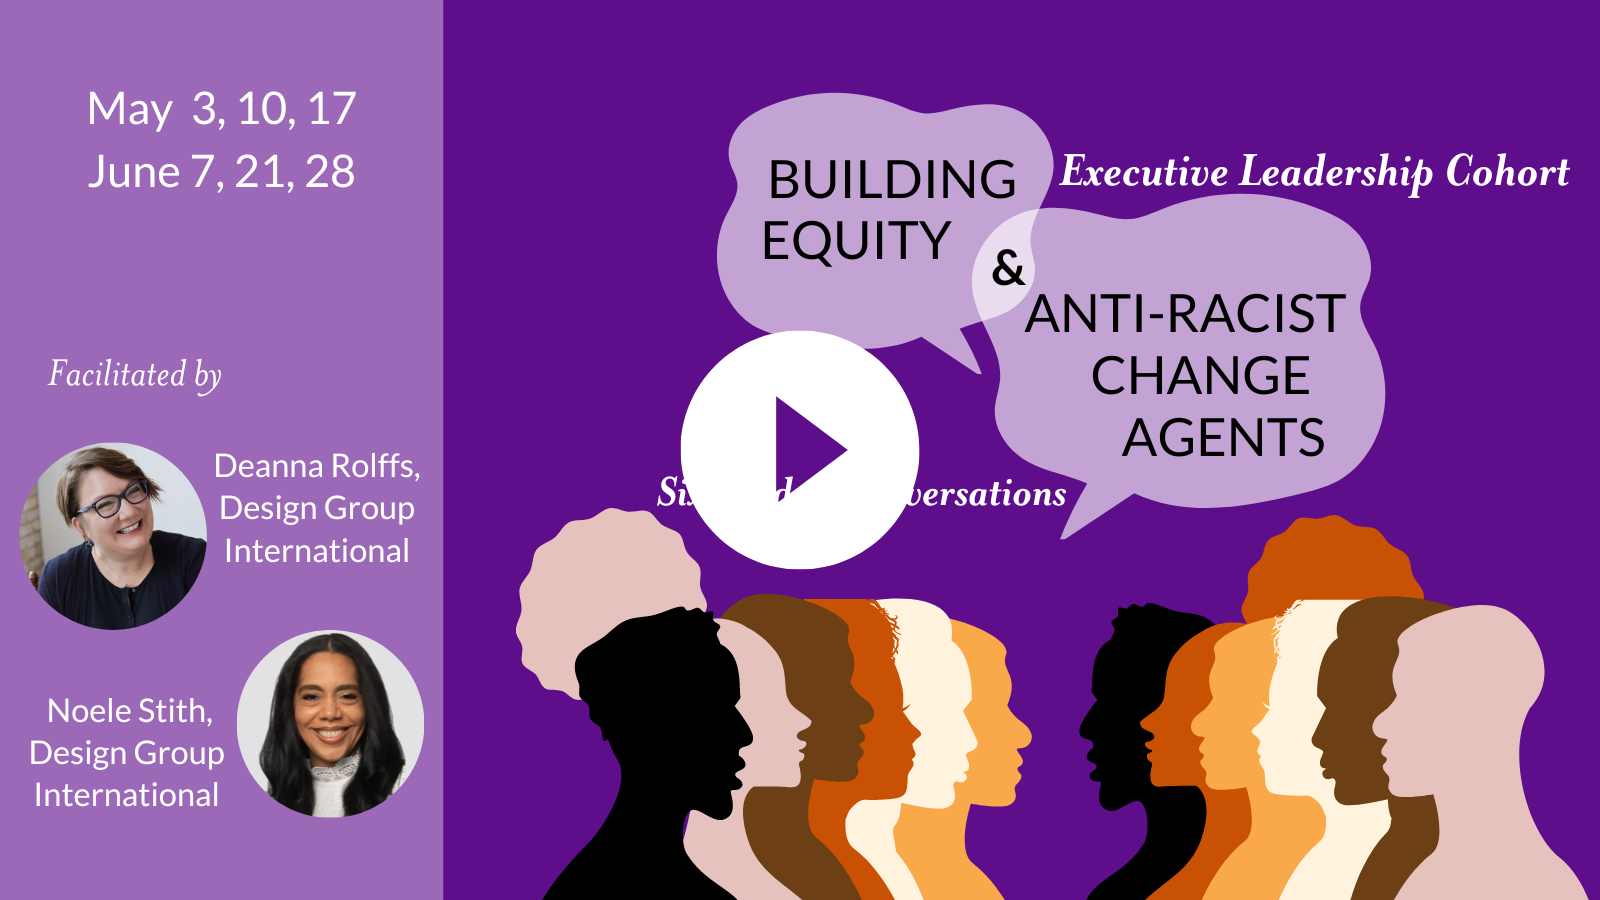 Video promotion for Executive Leadership Cohort: Building Equity & Anti-Racist Change Agents